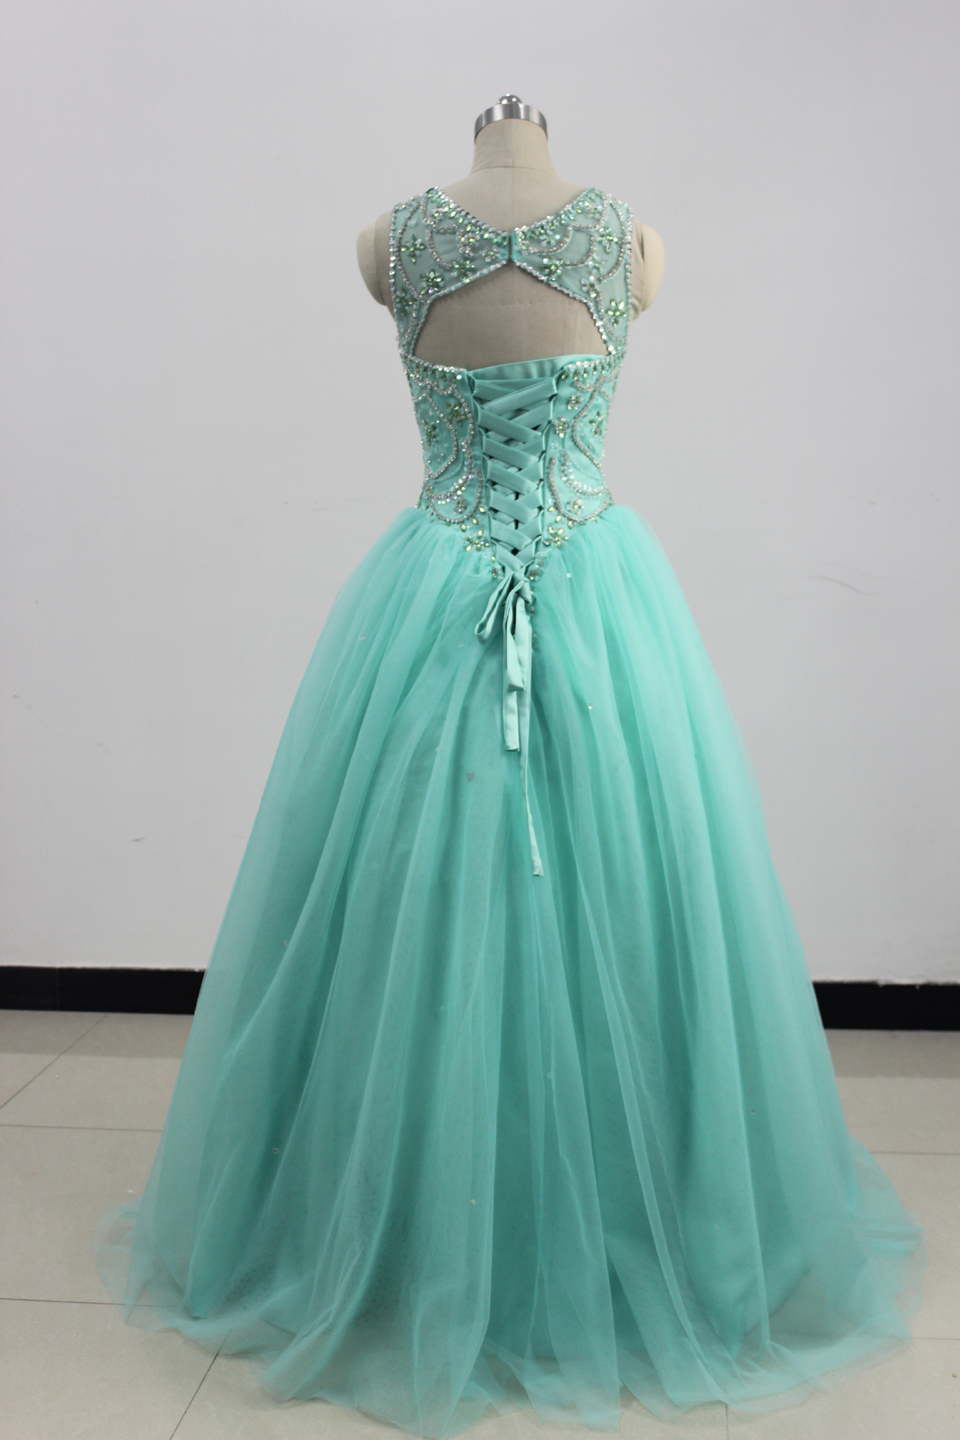 Sassy Wedding Turquoise Tulle Evening Dress Beaded Quinceanera Dresses Ball Gown for 15 Prom Party Dress Custom Prom Gowns Sweet 16 Dresses